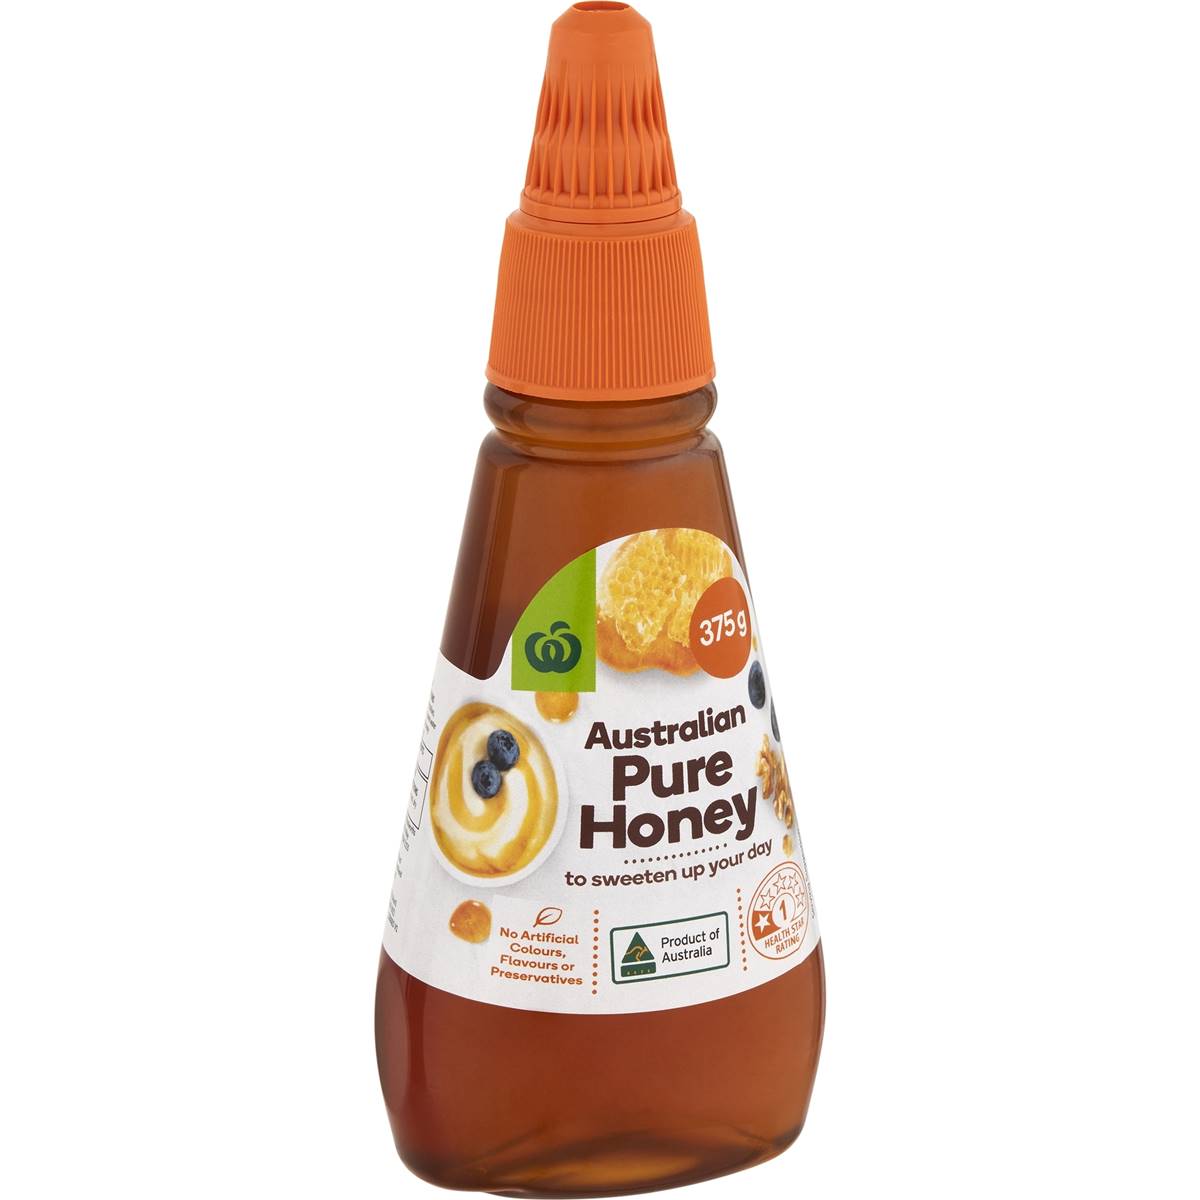 Calories in Woolworths Pure Honey Twist & Squeeze